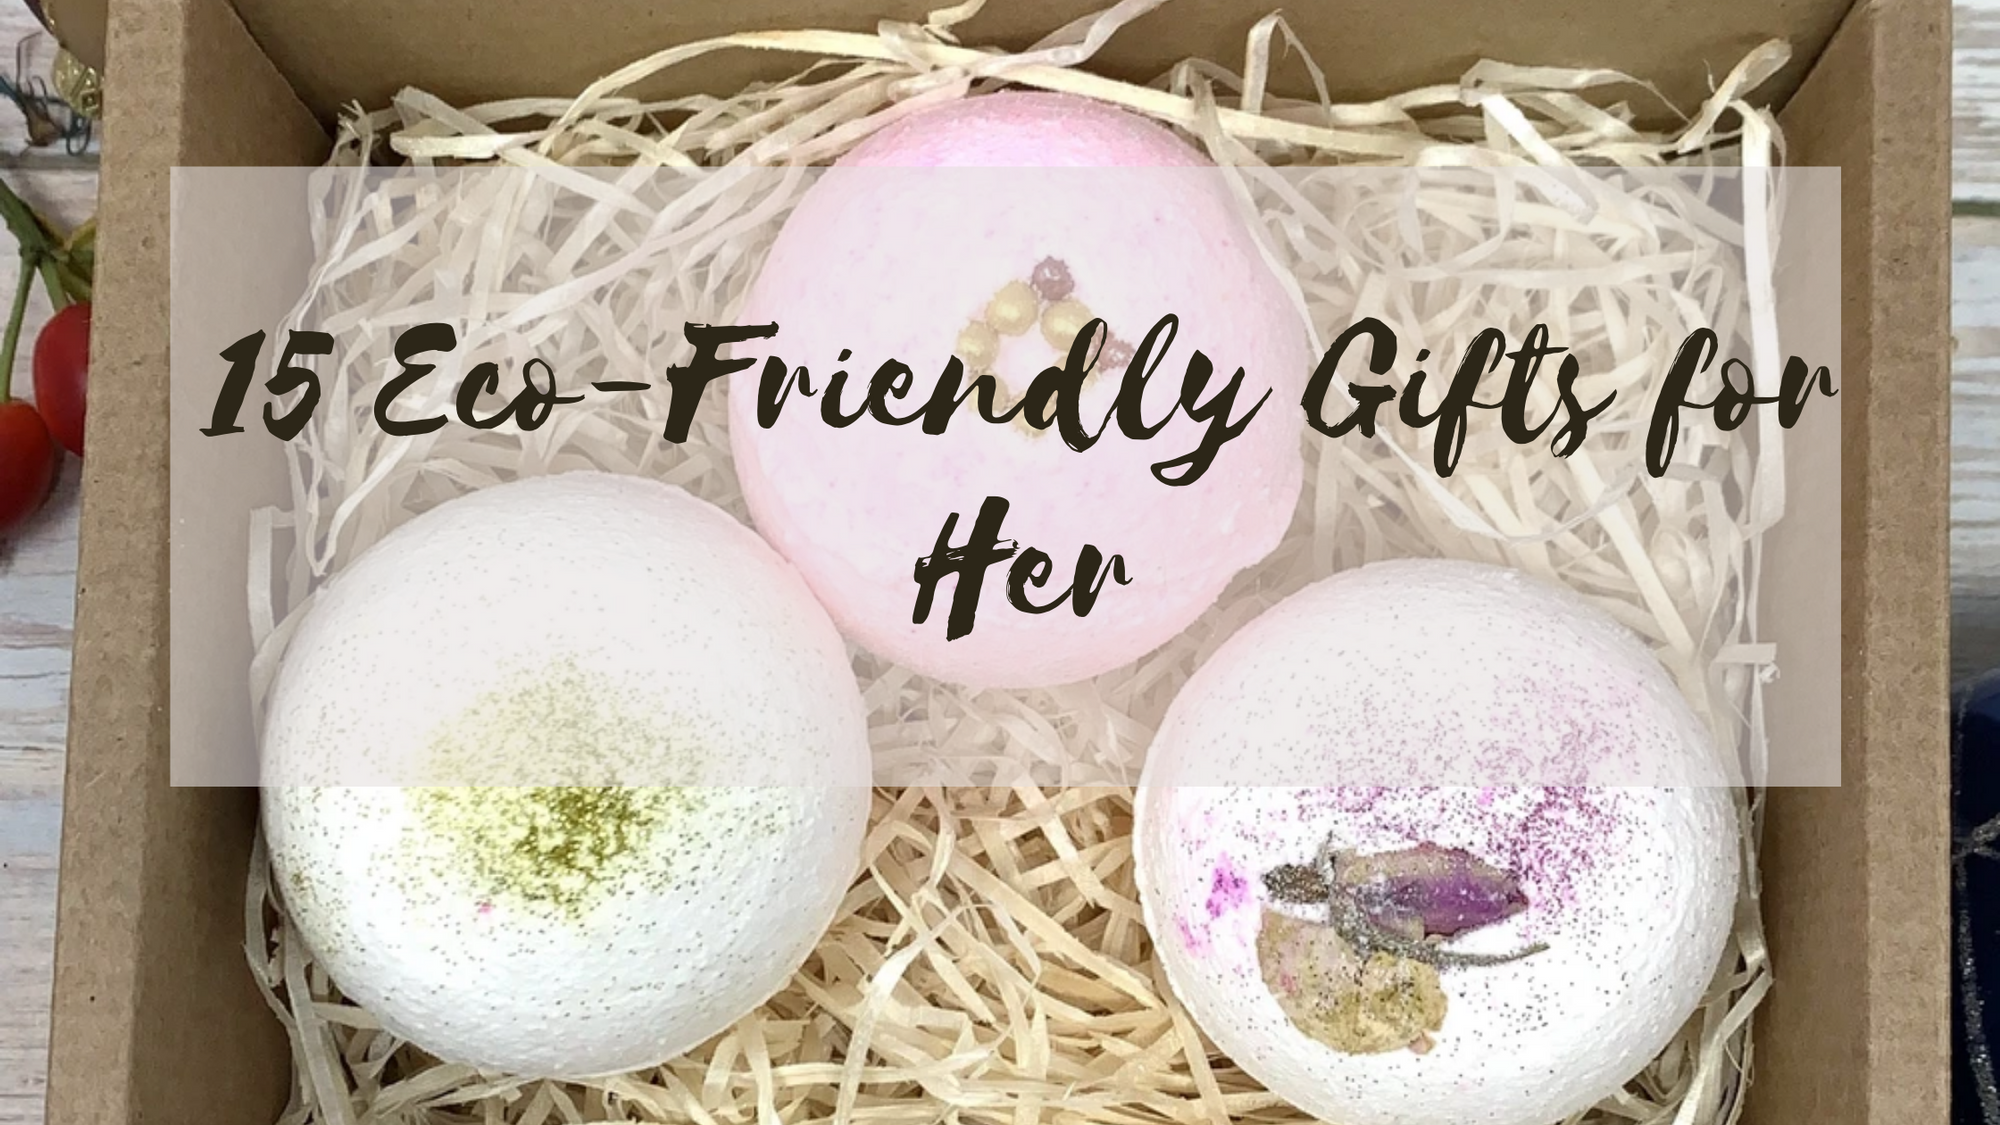 eco friendly gifts for her